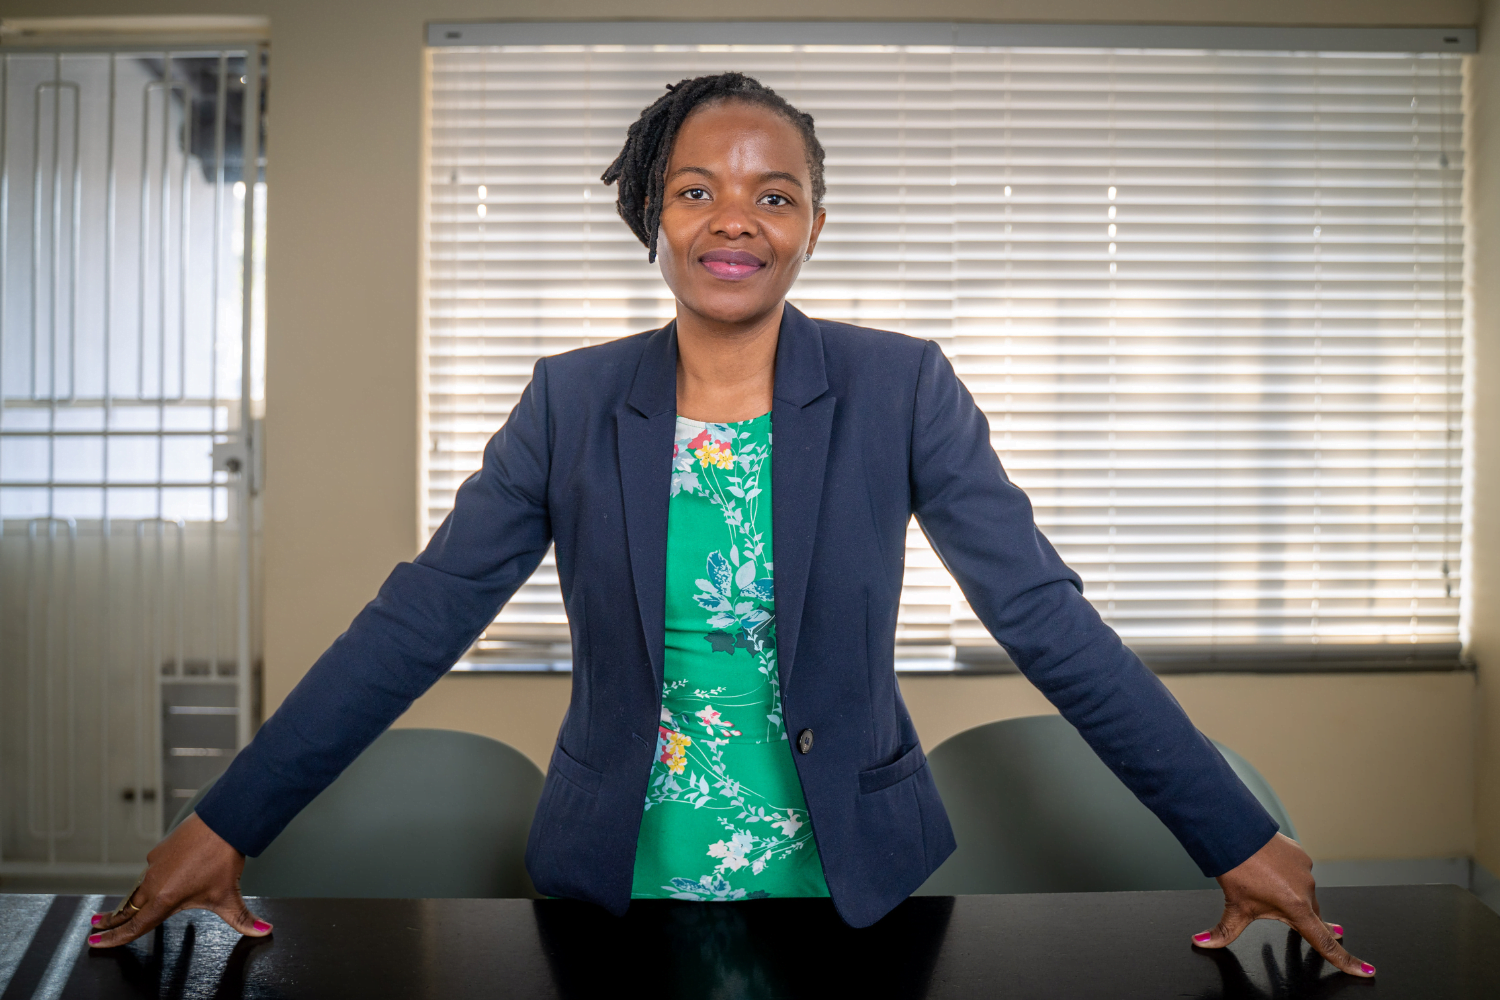 Dudu Makhari, Executive Director of the Ngangezwe Foundation in Johannesburg, South Africa, poses at a desk in her office.